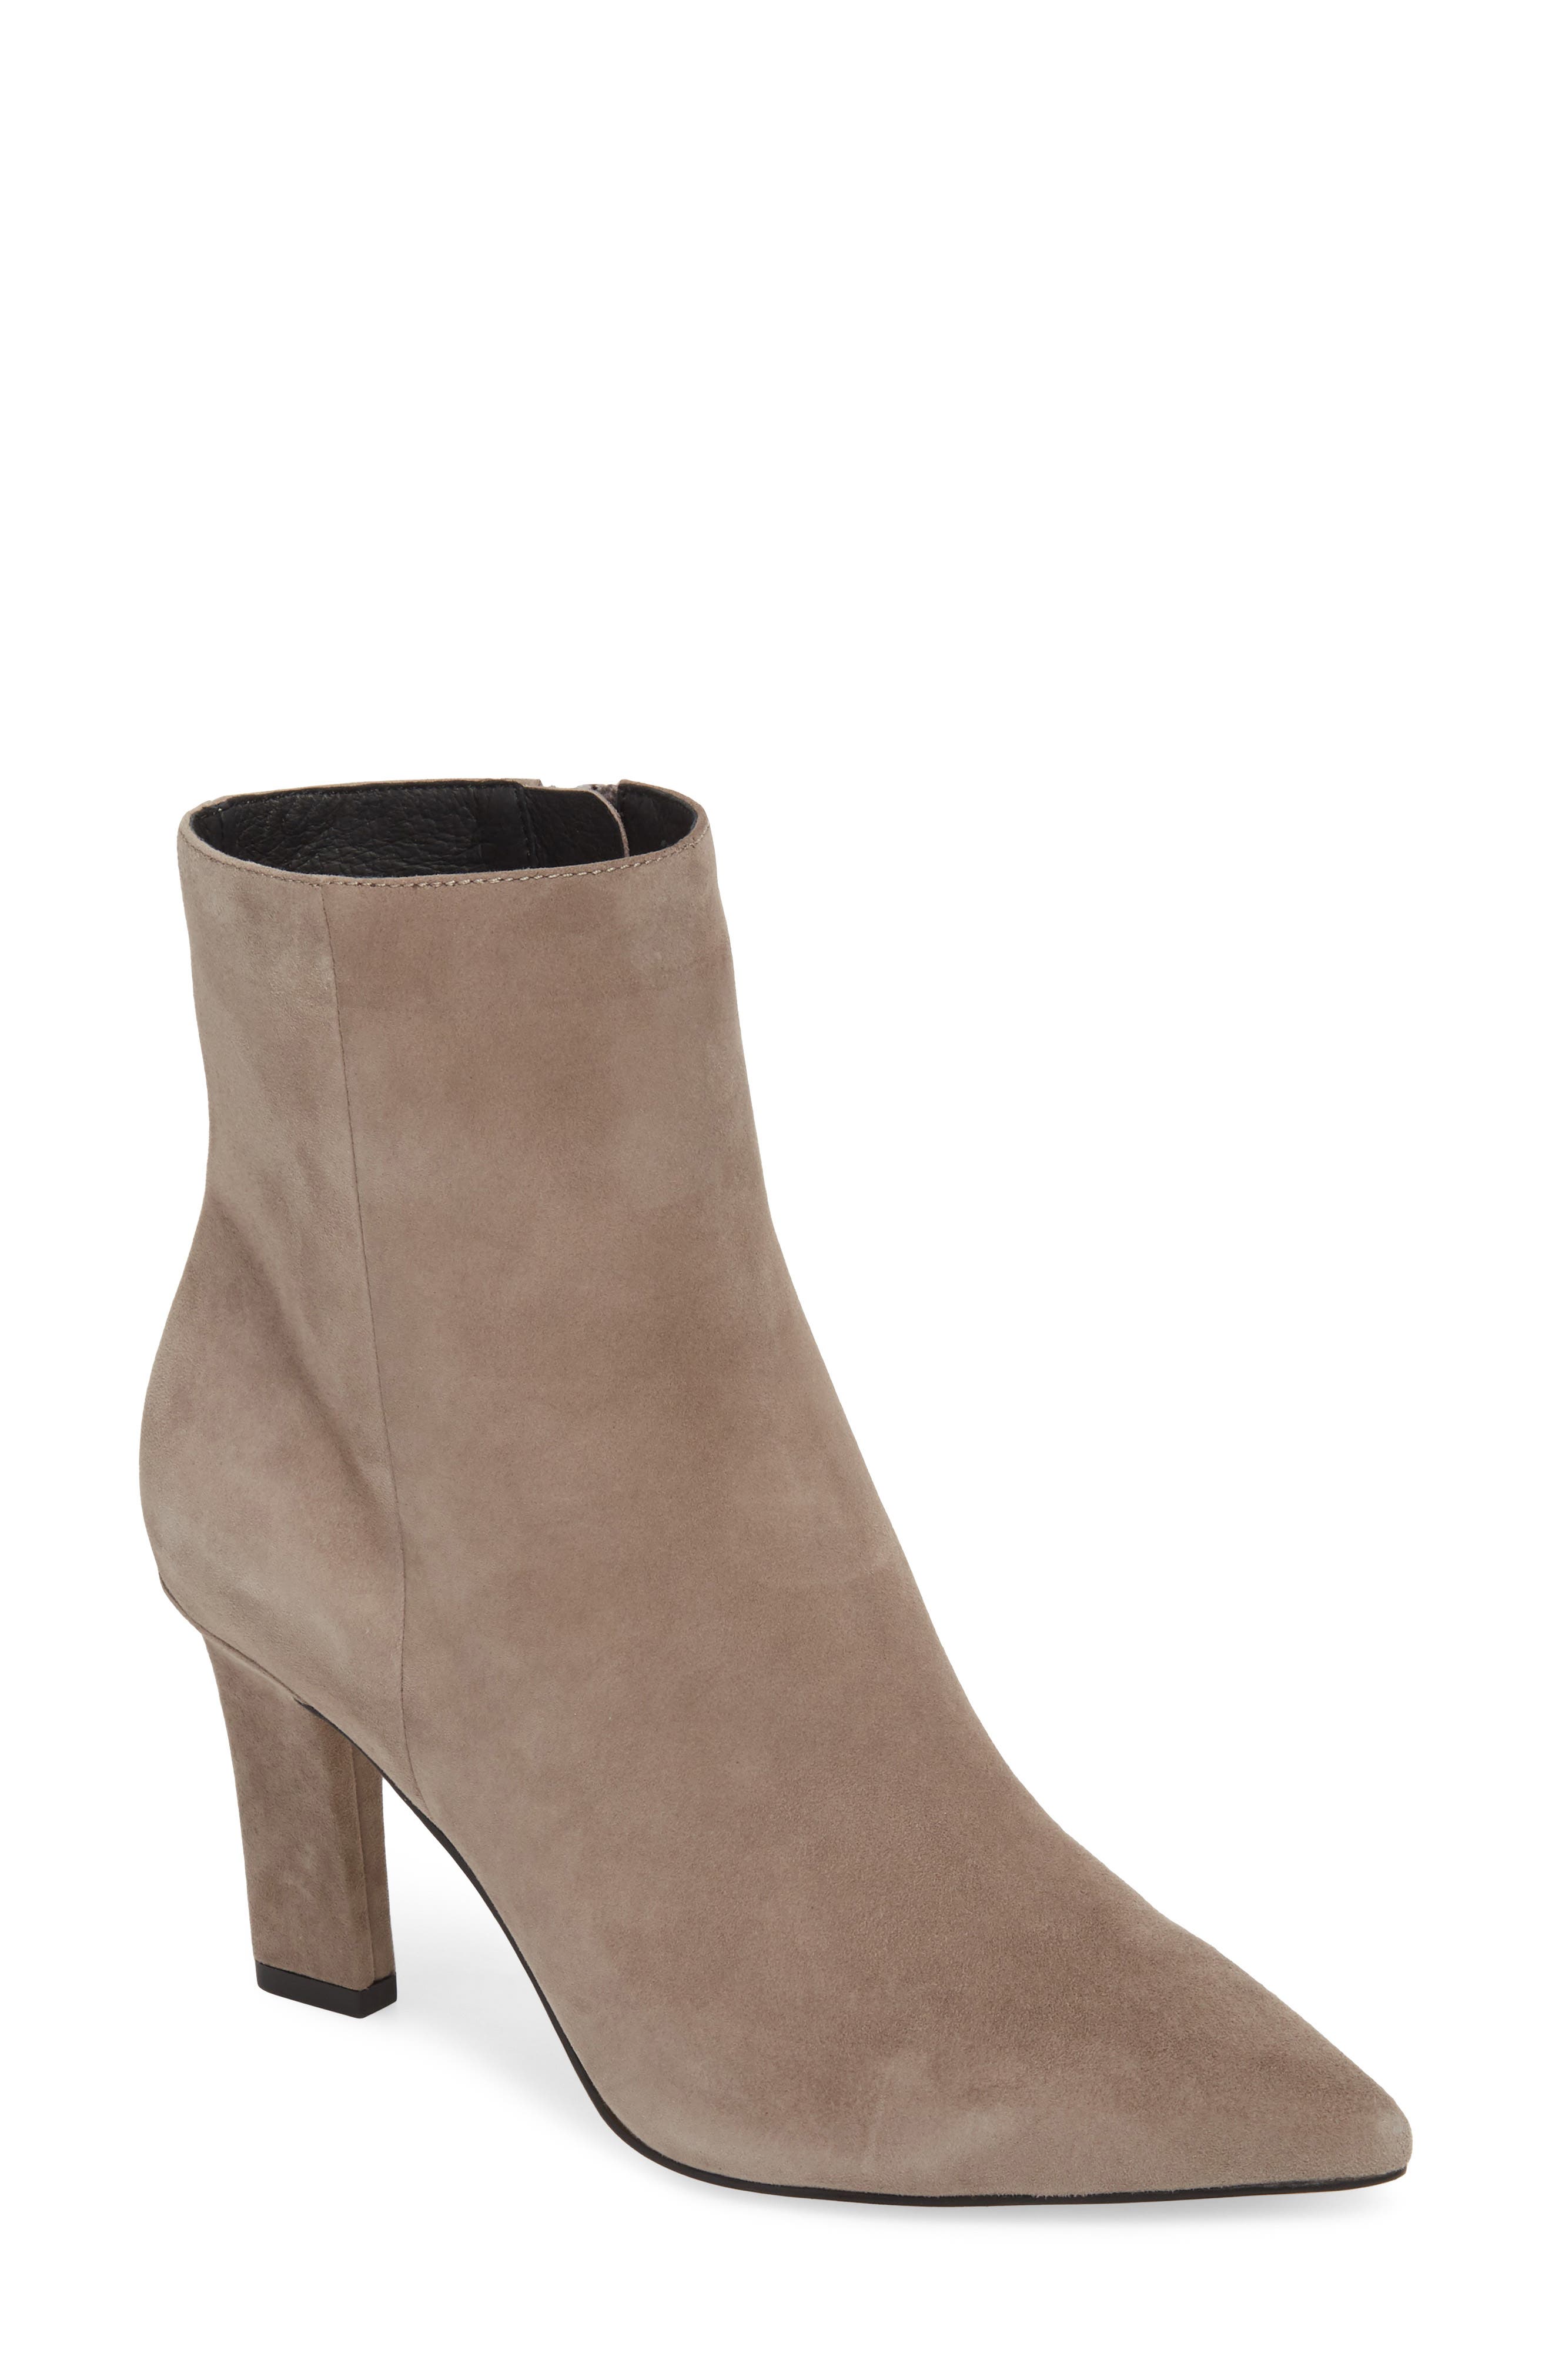 Botkier Ankle Boots, Boots for Women 